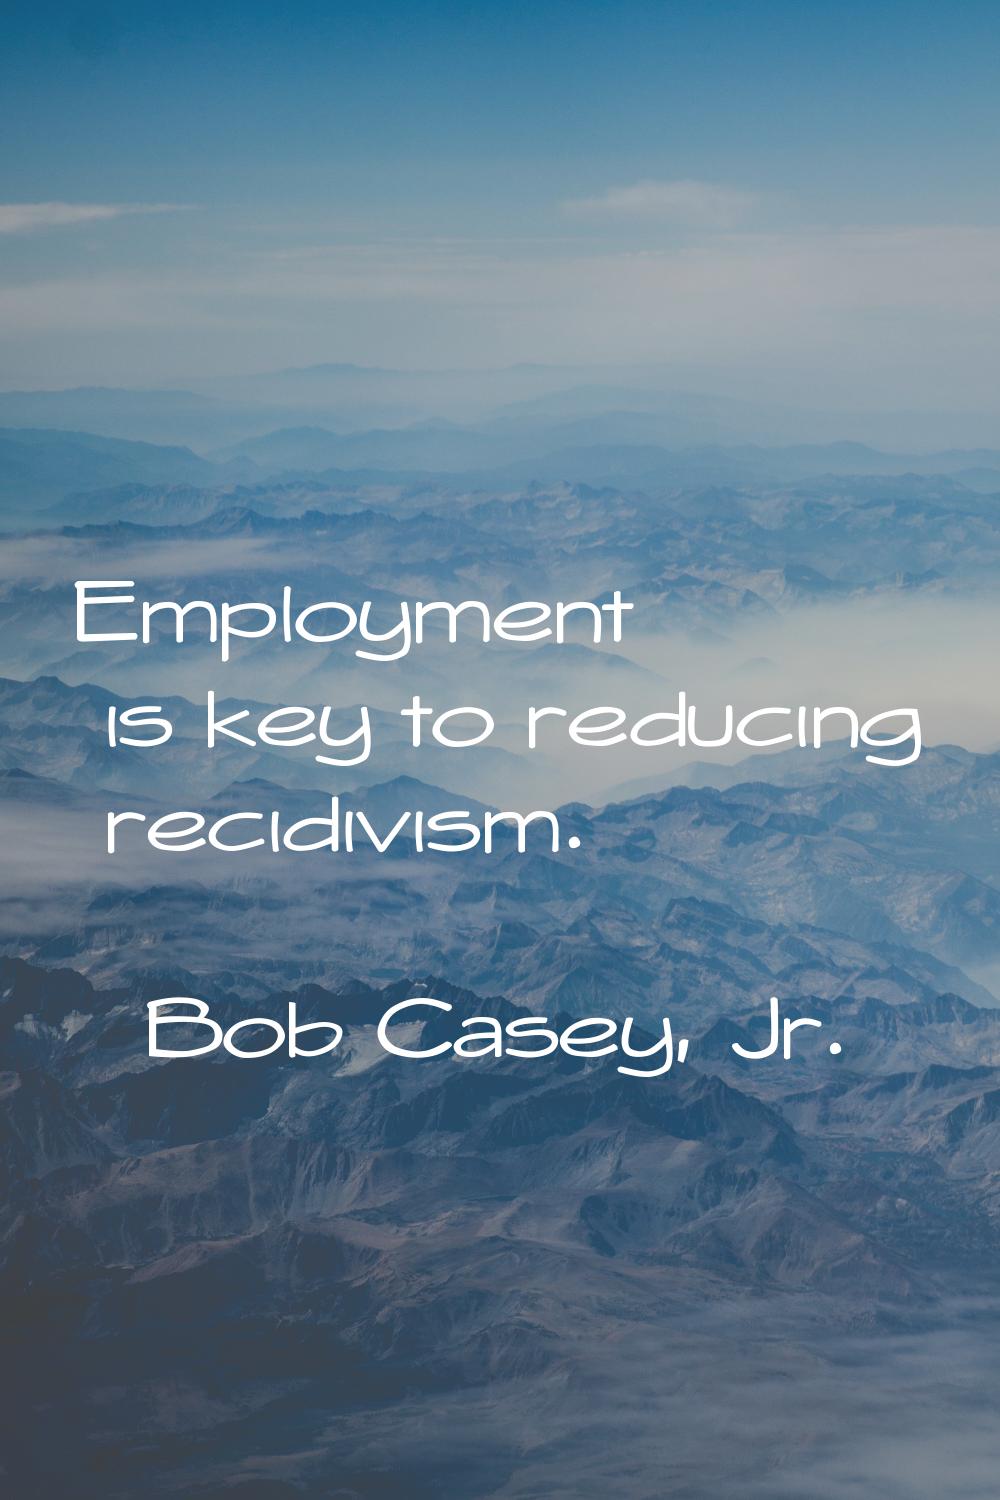 Employment is key to reducing recidivism.